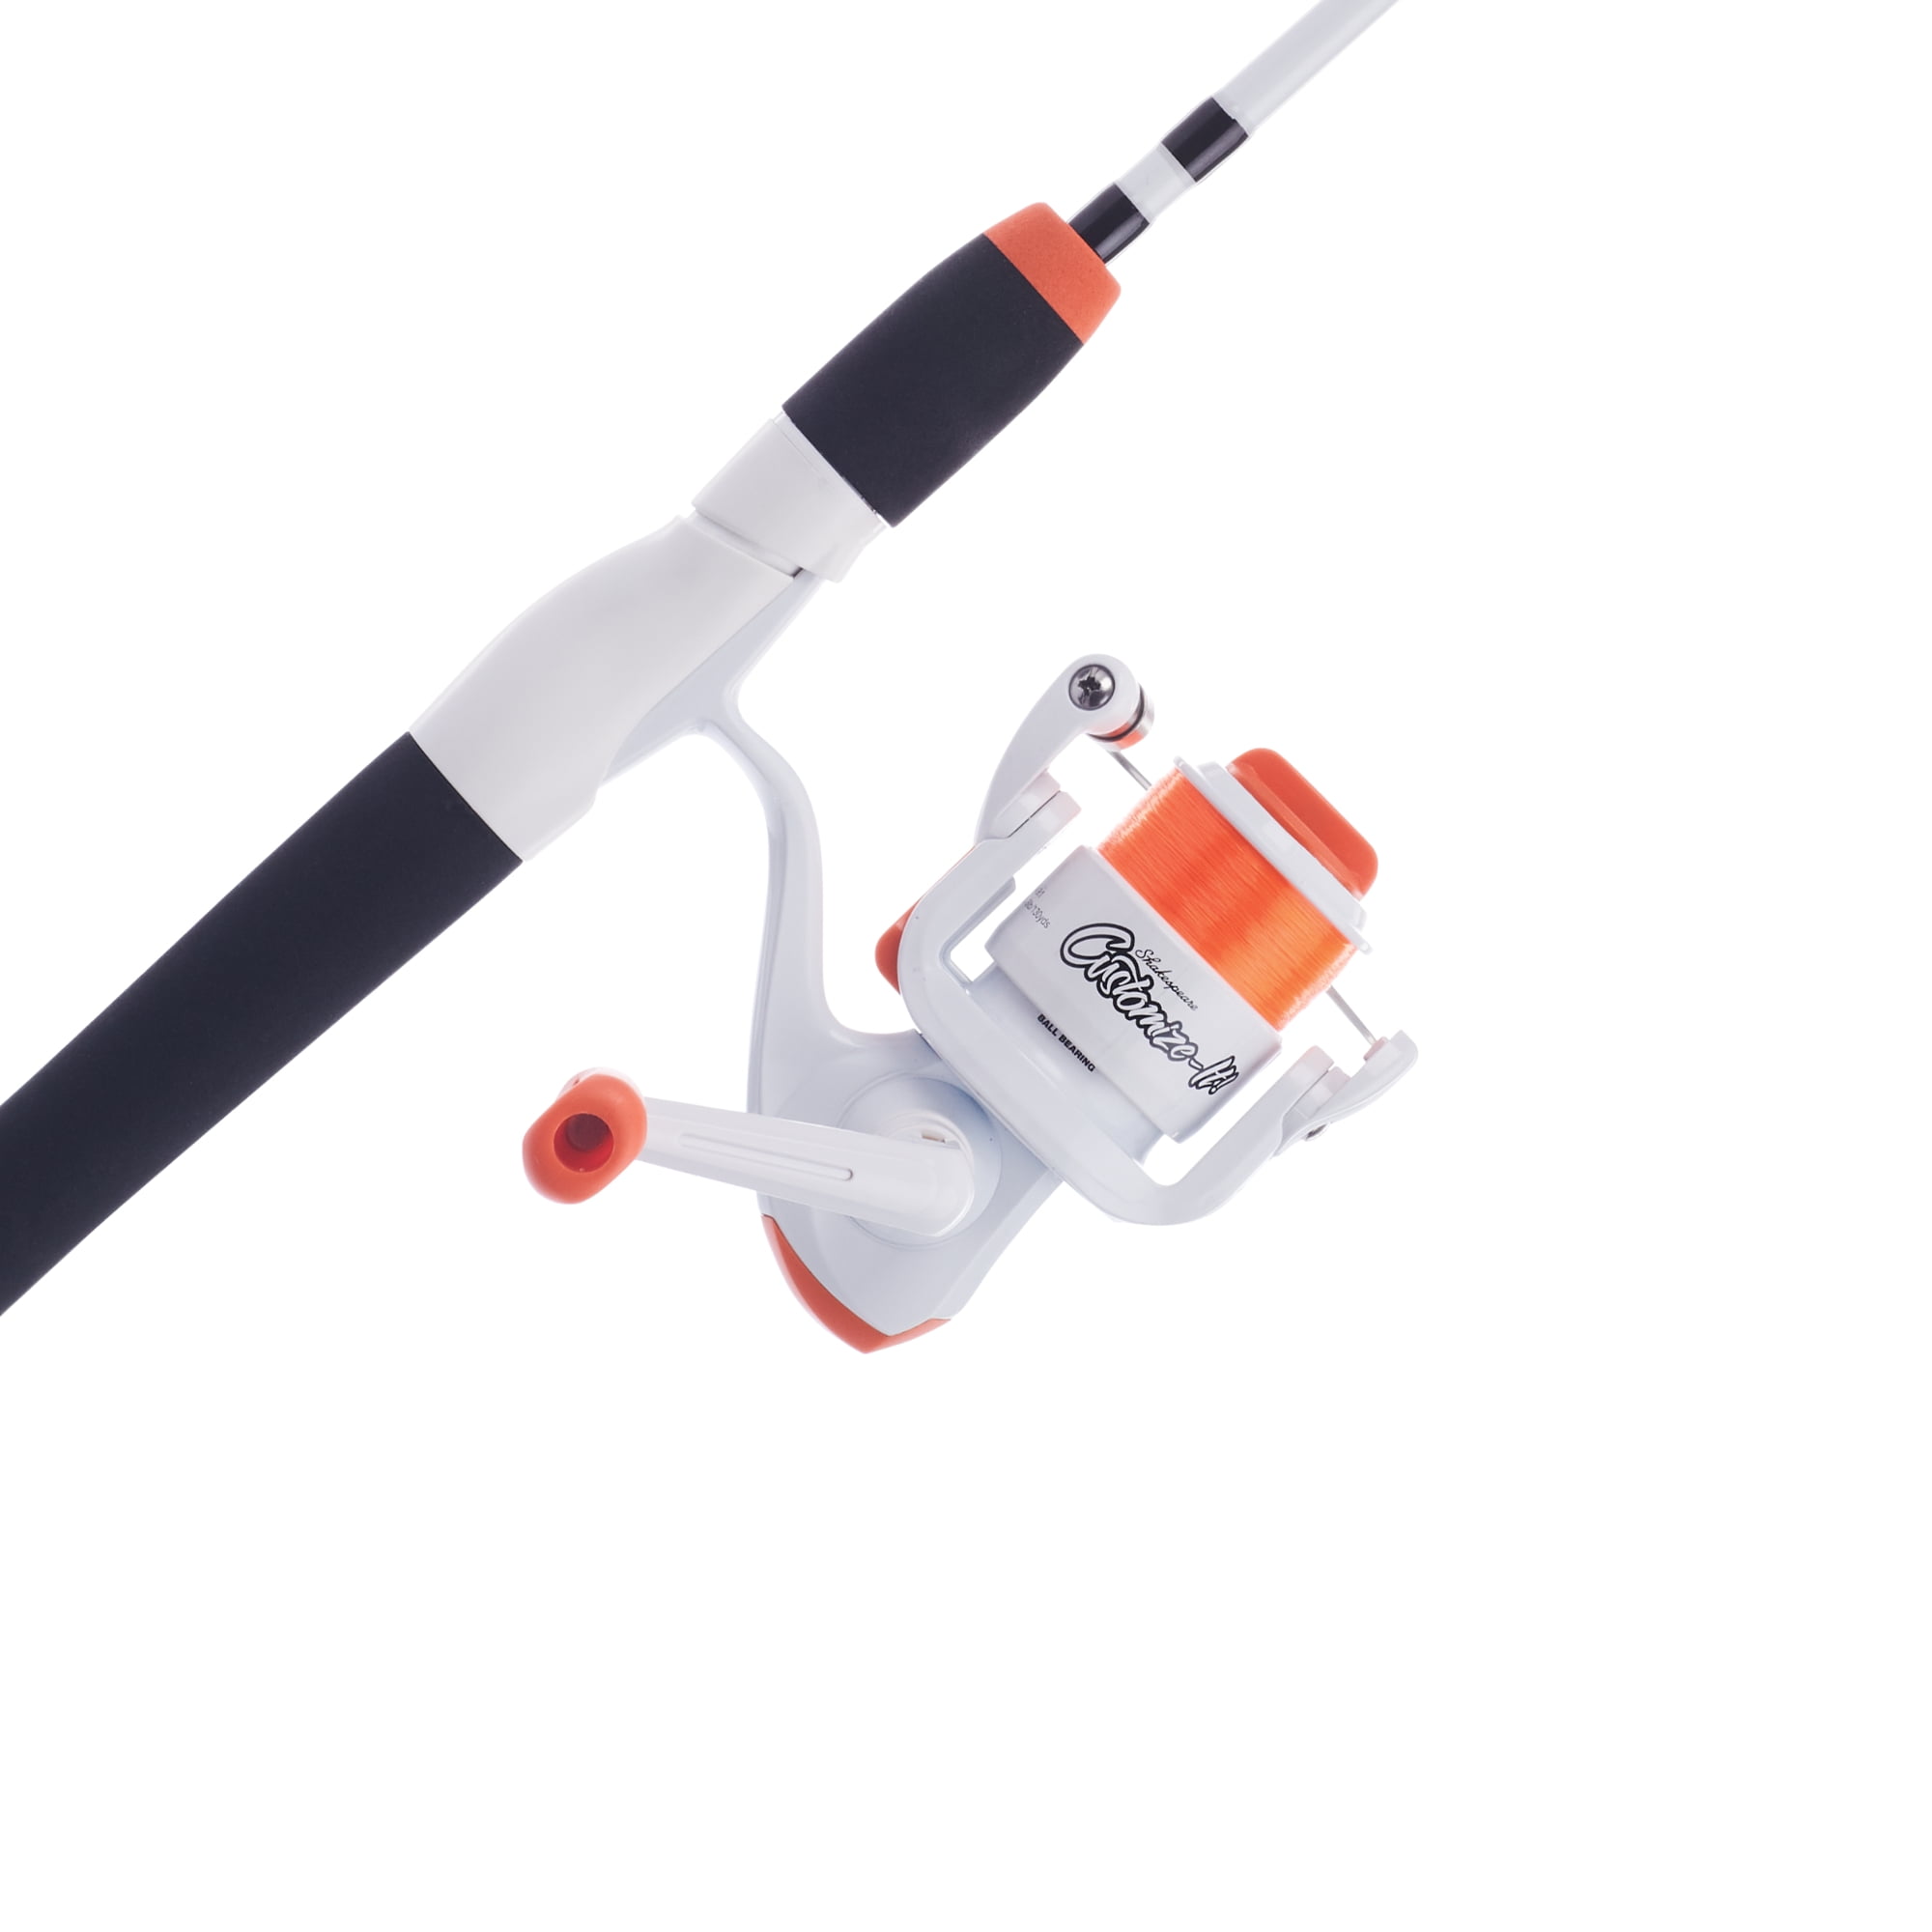 Shakespeare Customize-It Spincast Reel and Fishing Rod Combo